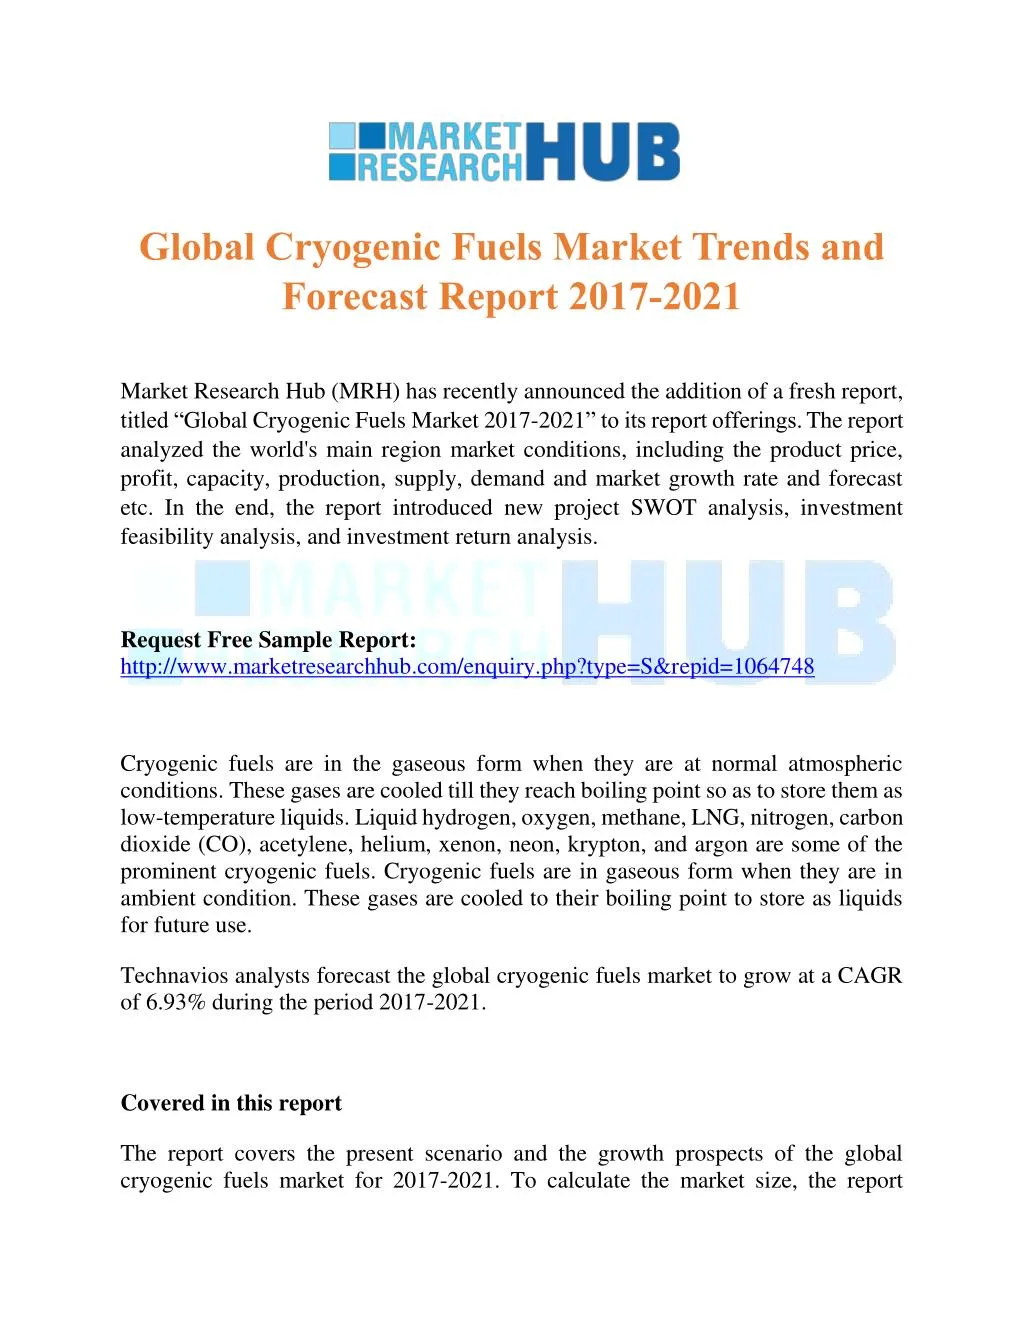 global cryogenic fuels market trends and forecast